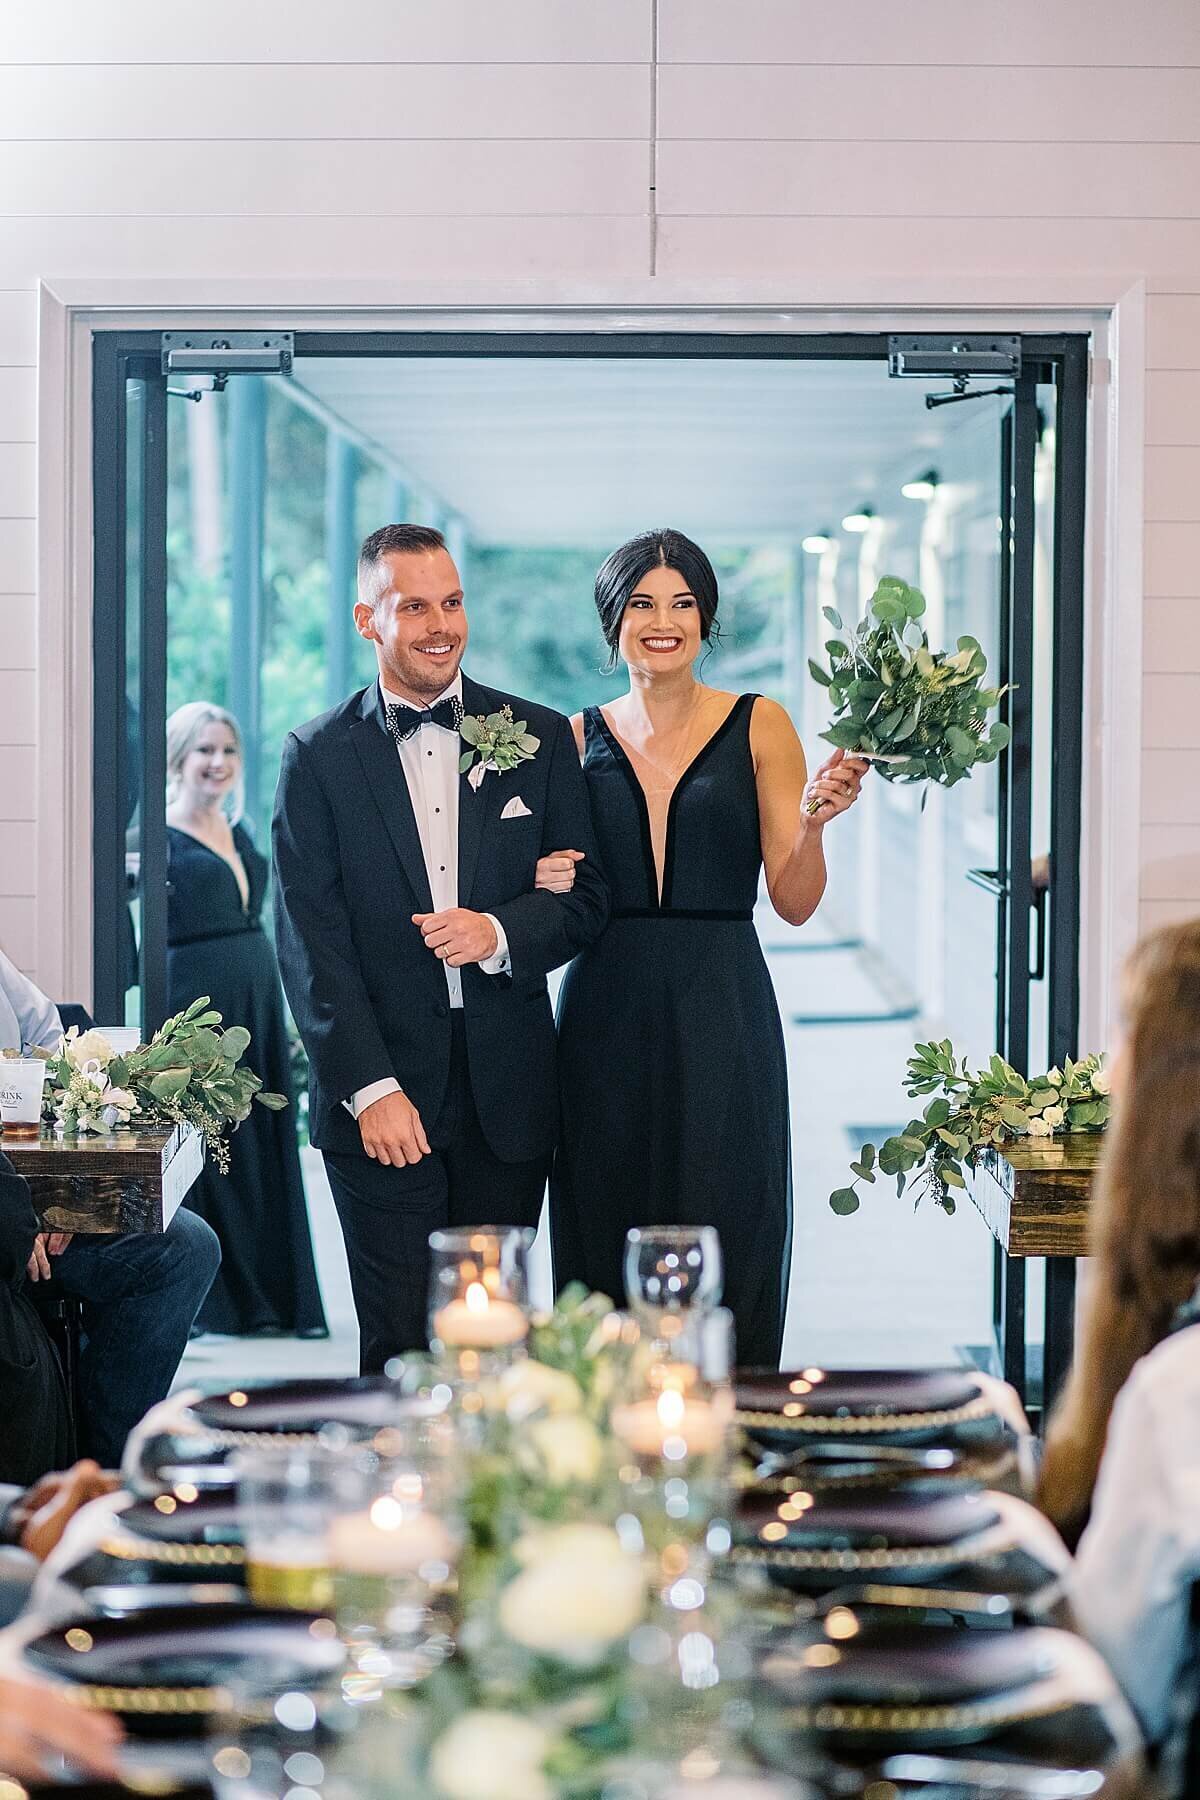 Reception at Black and White Themed Annex Wedding photographed by Alicia Yarrish Photography